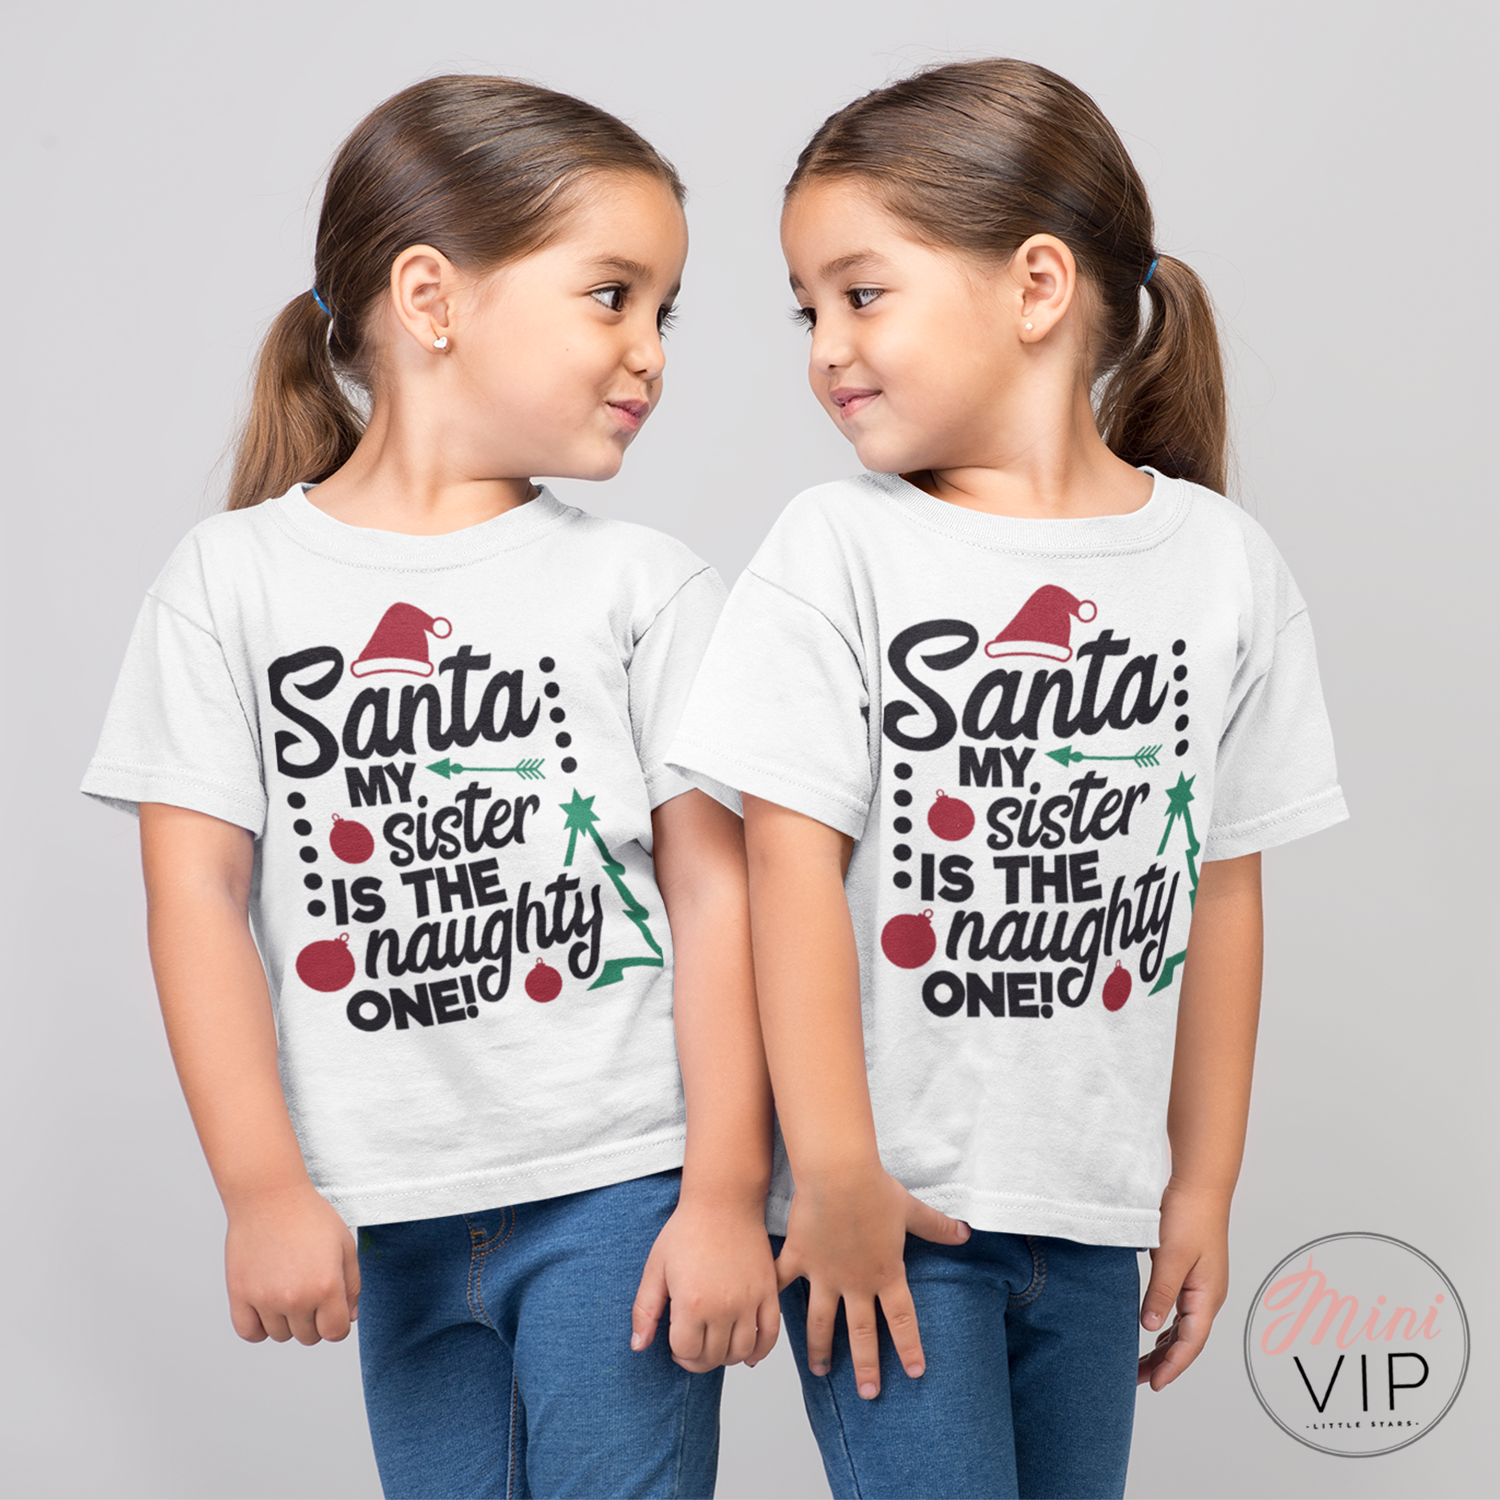 Santa My Sibling is the Naughty one white t-shirt